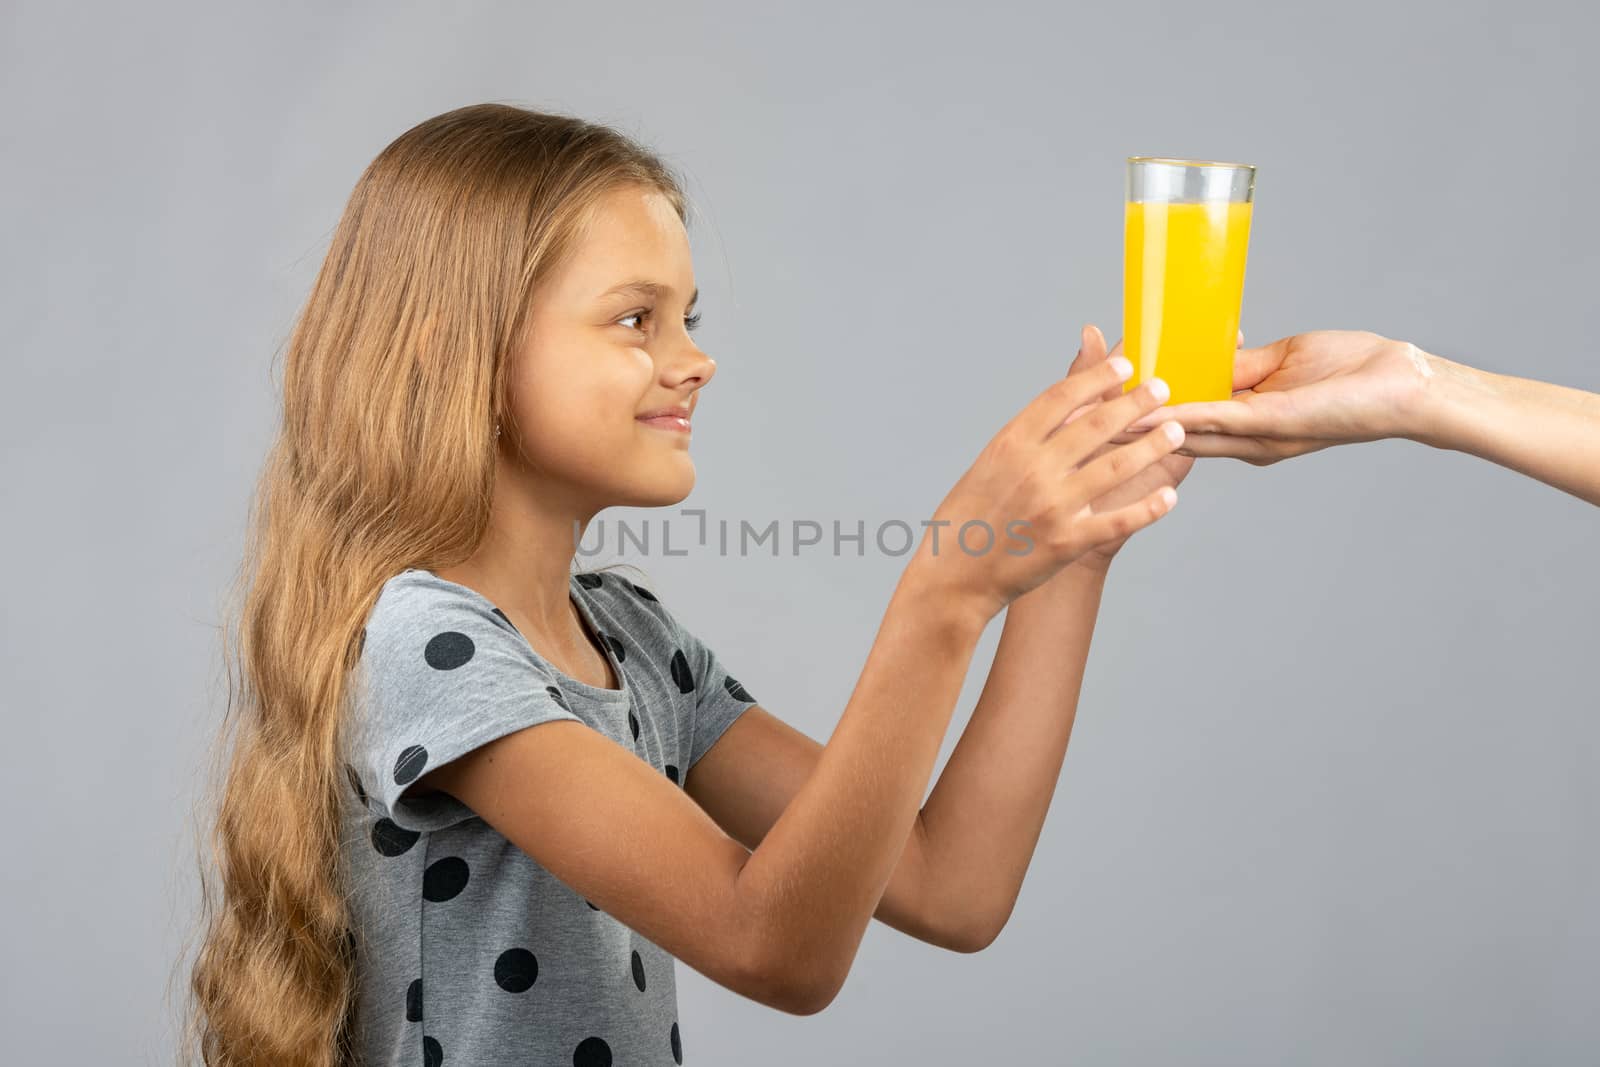 A girl with two hands takes a glass of juice from the hand of another person by Madhourse